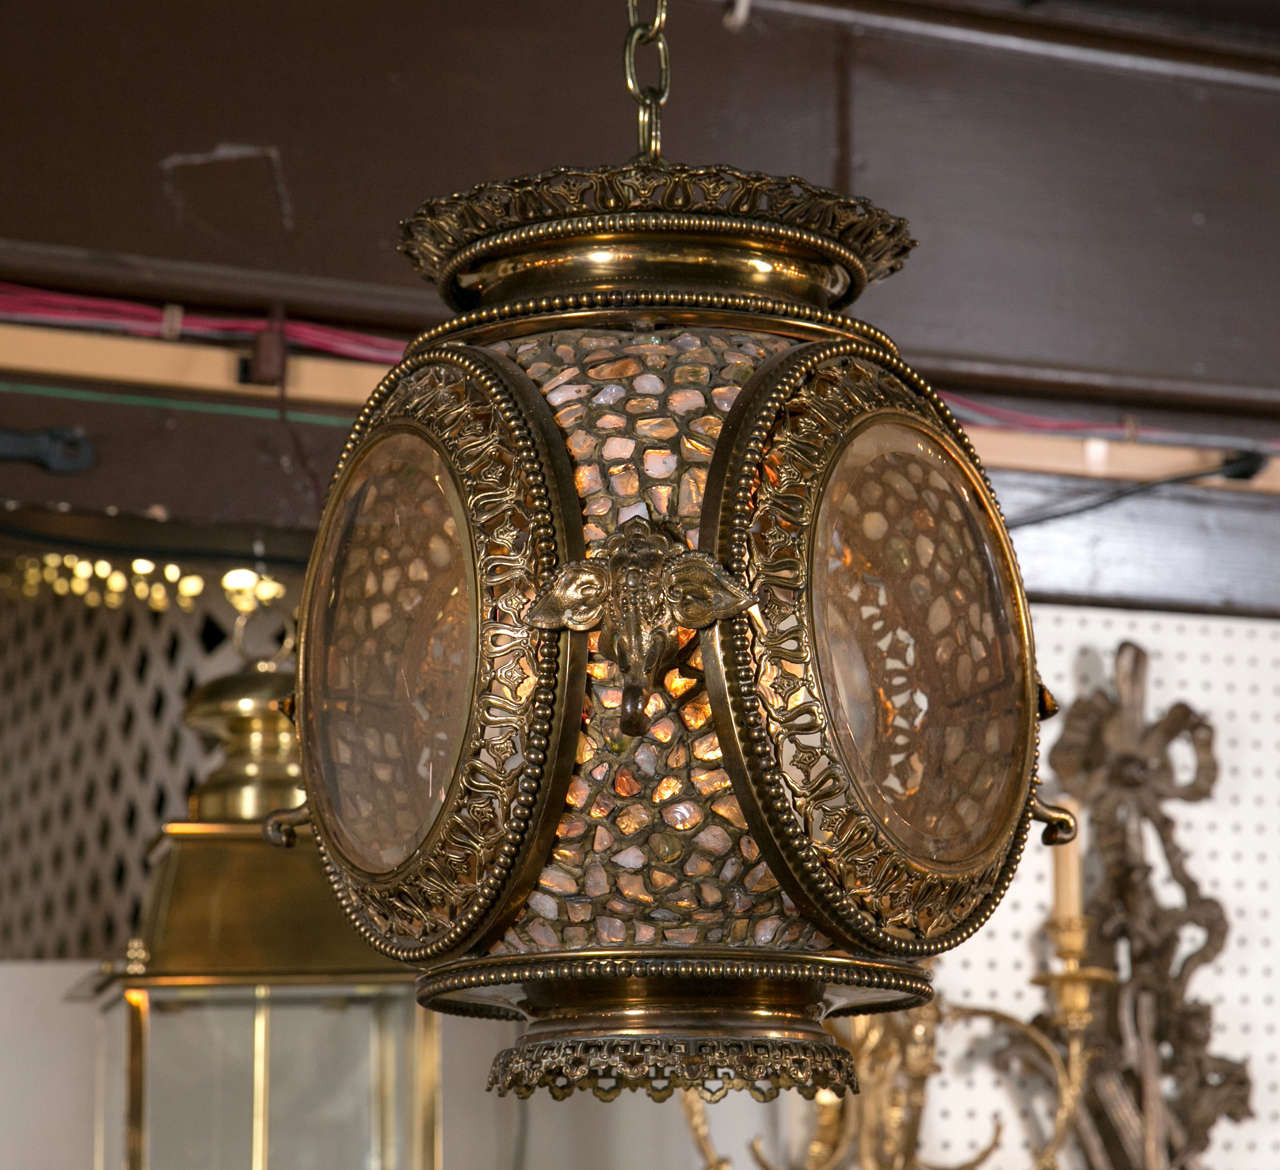 This hanging lantern has three sides of beveled glass with an open fretwork frame. The surrounding areas are of translucent stones within brass. There are three elephant heads between the beveled glass and open fretworks frames.
The bottom did have